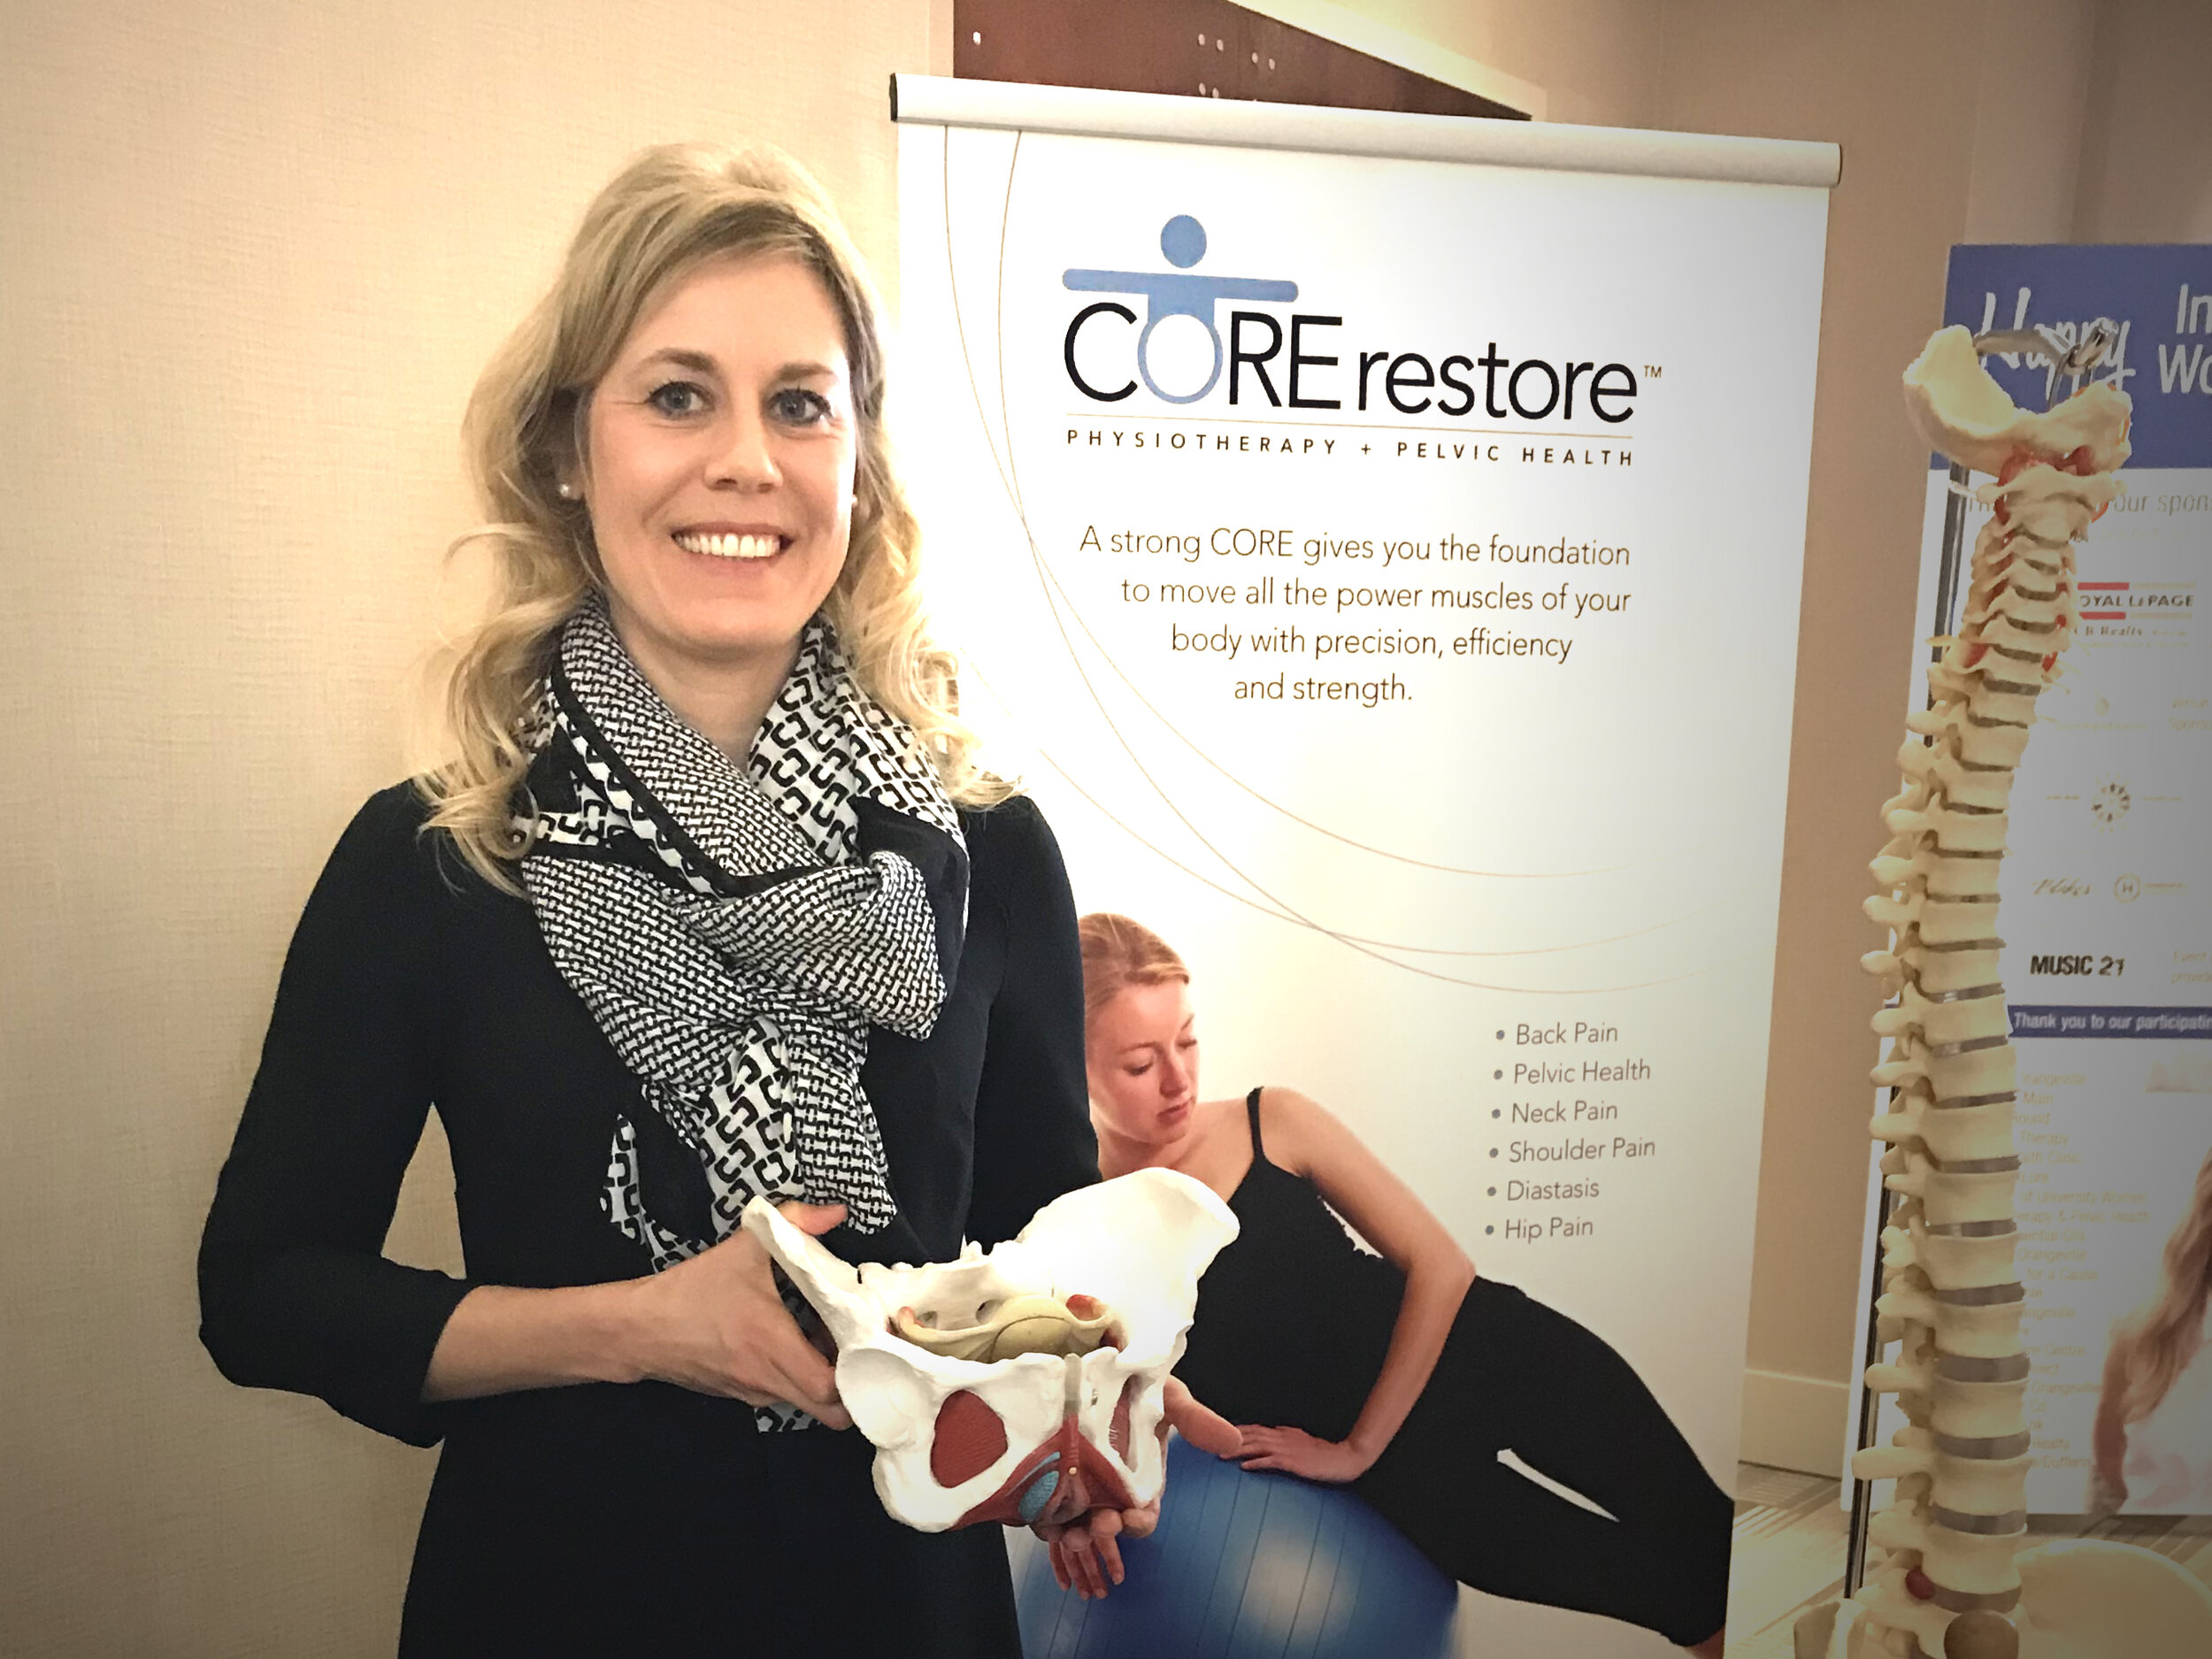 About Core Restore — Core Restore Physiotherapy